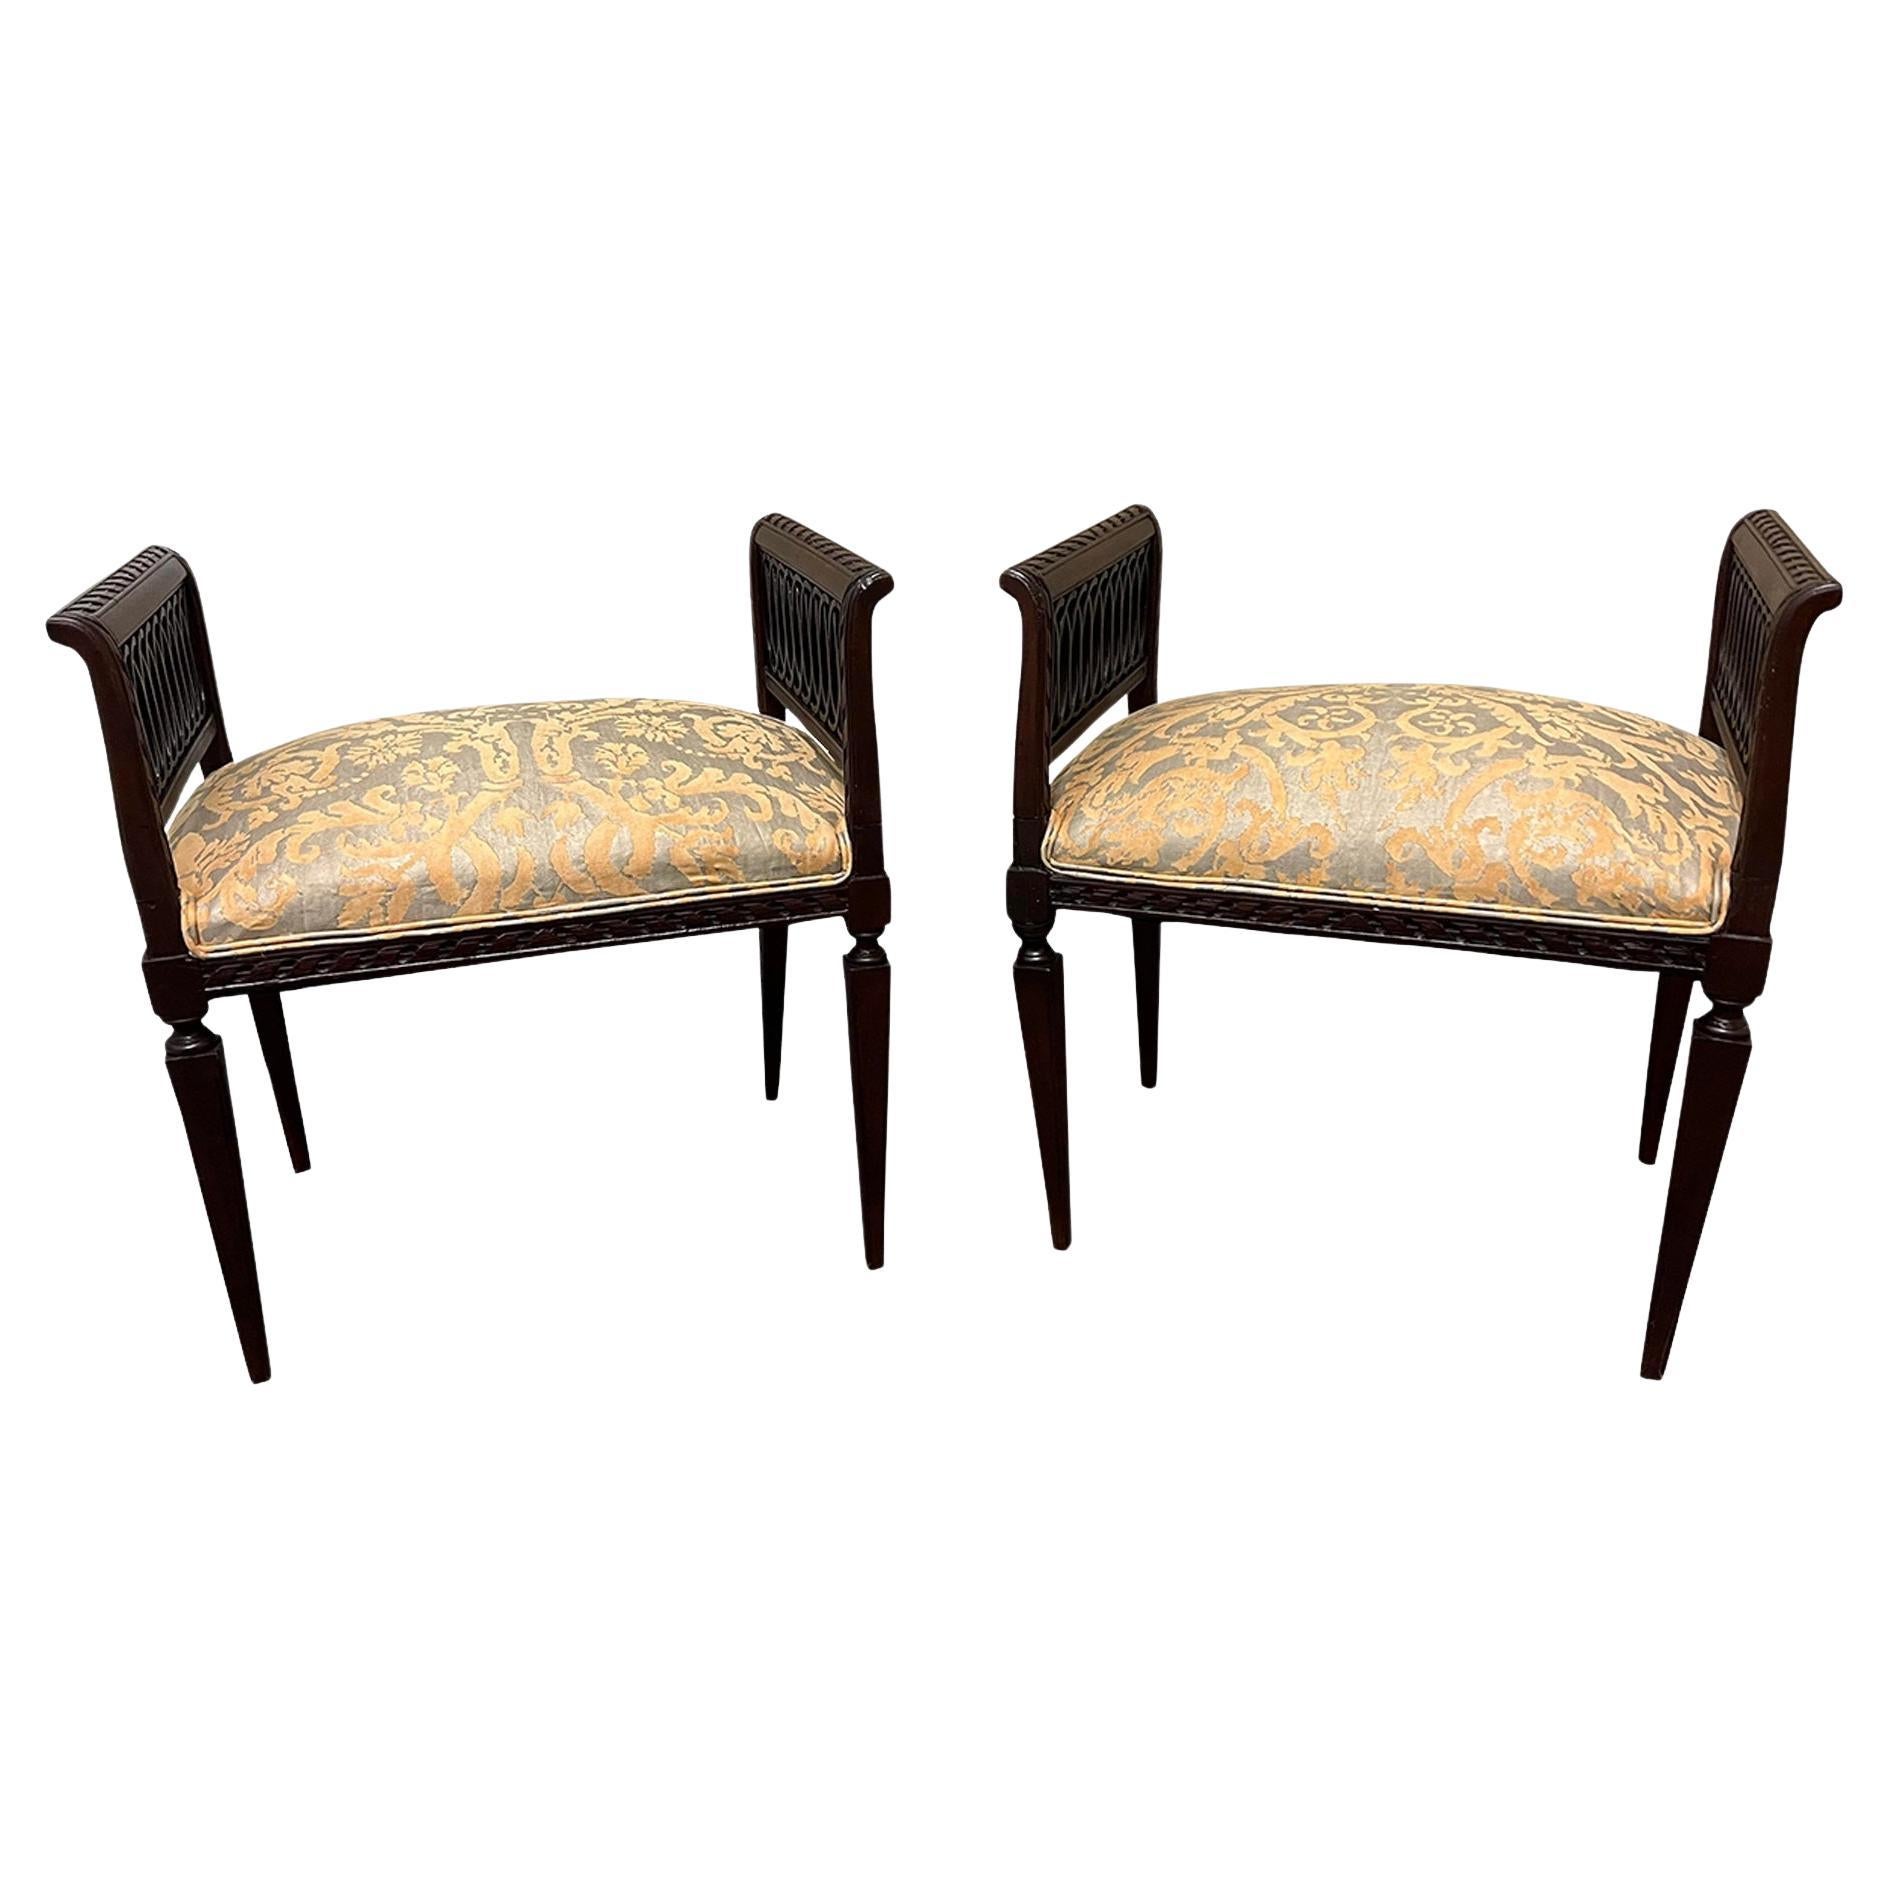 Pair, 19th Century French Louis XVI Carved Stools in Mariano Fortuny Upholstery For Sale